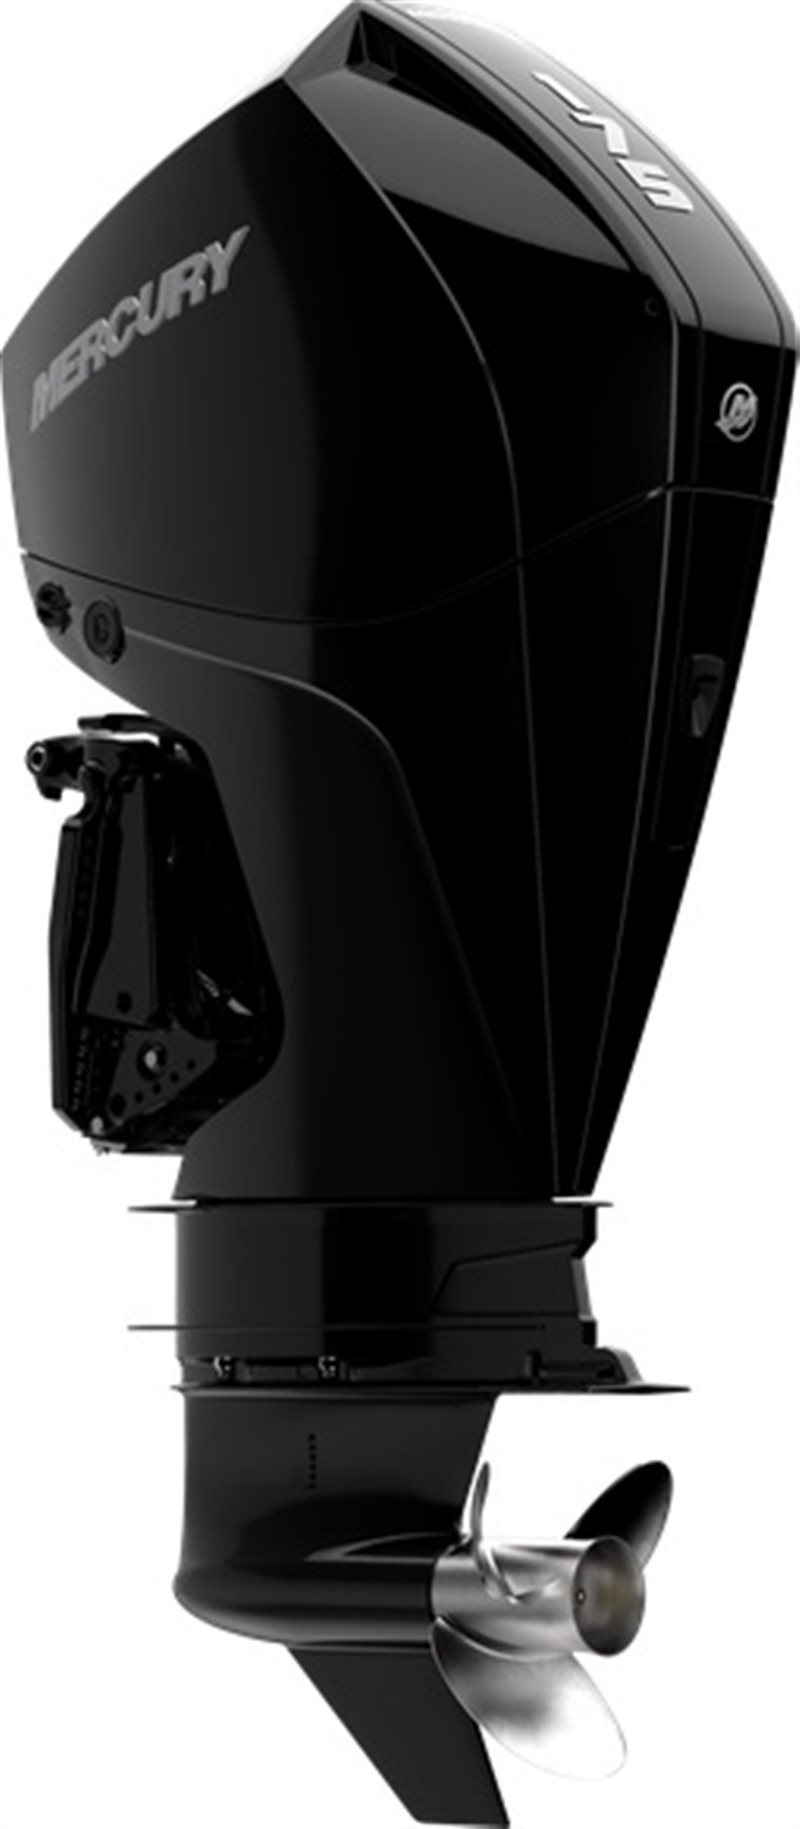 2020 Mercury Outboard Fourstroke 175 - 300 300 HP at Fort Fremont Marine